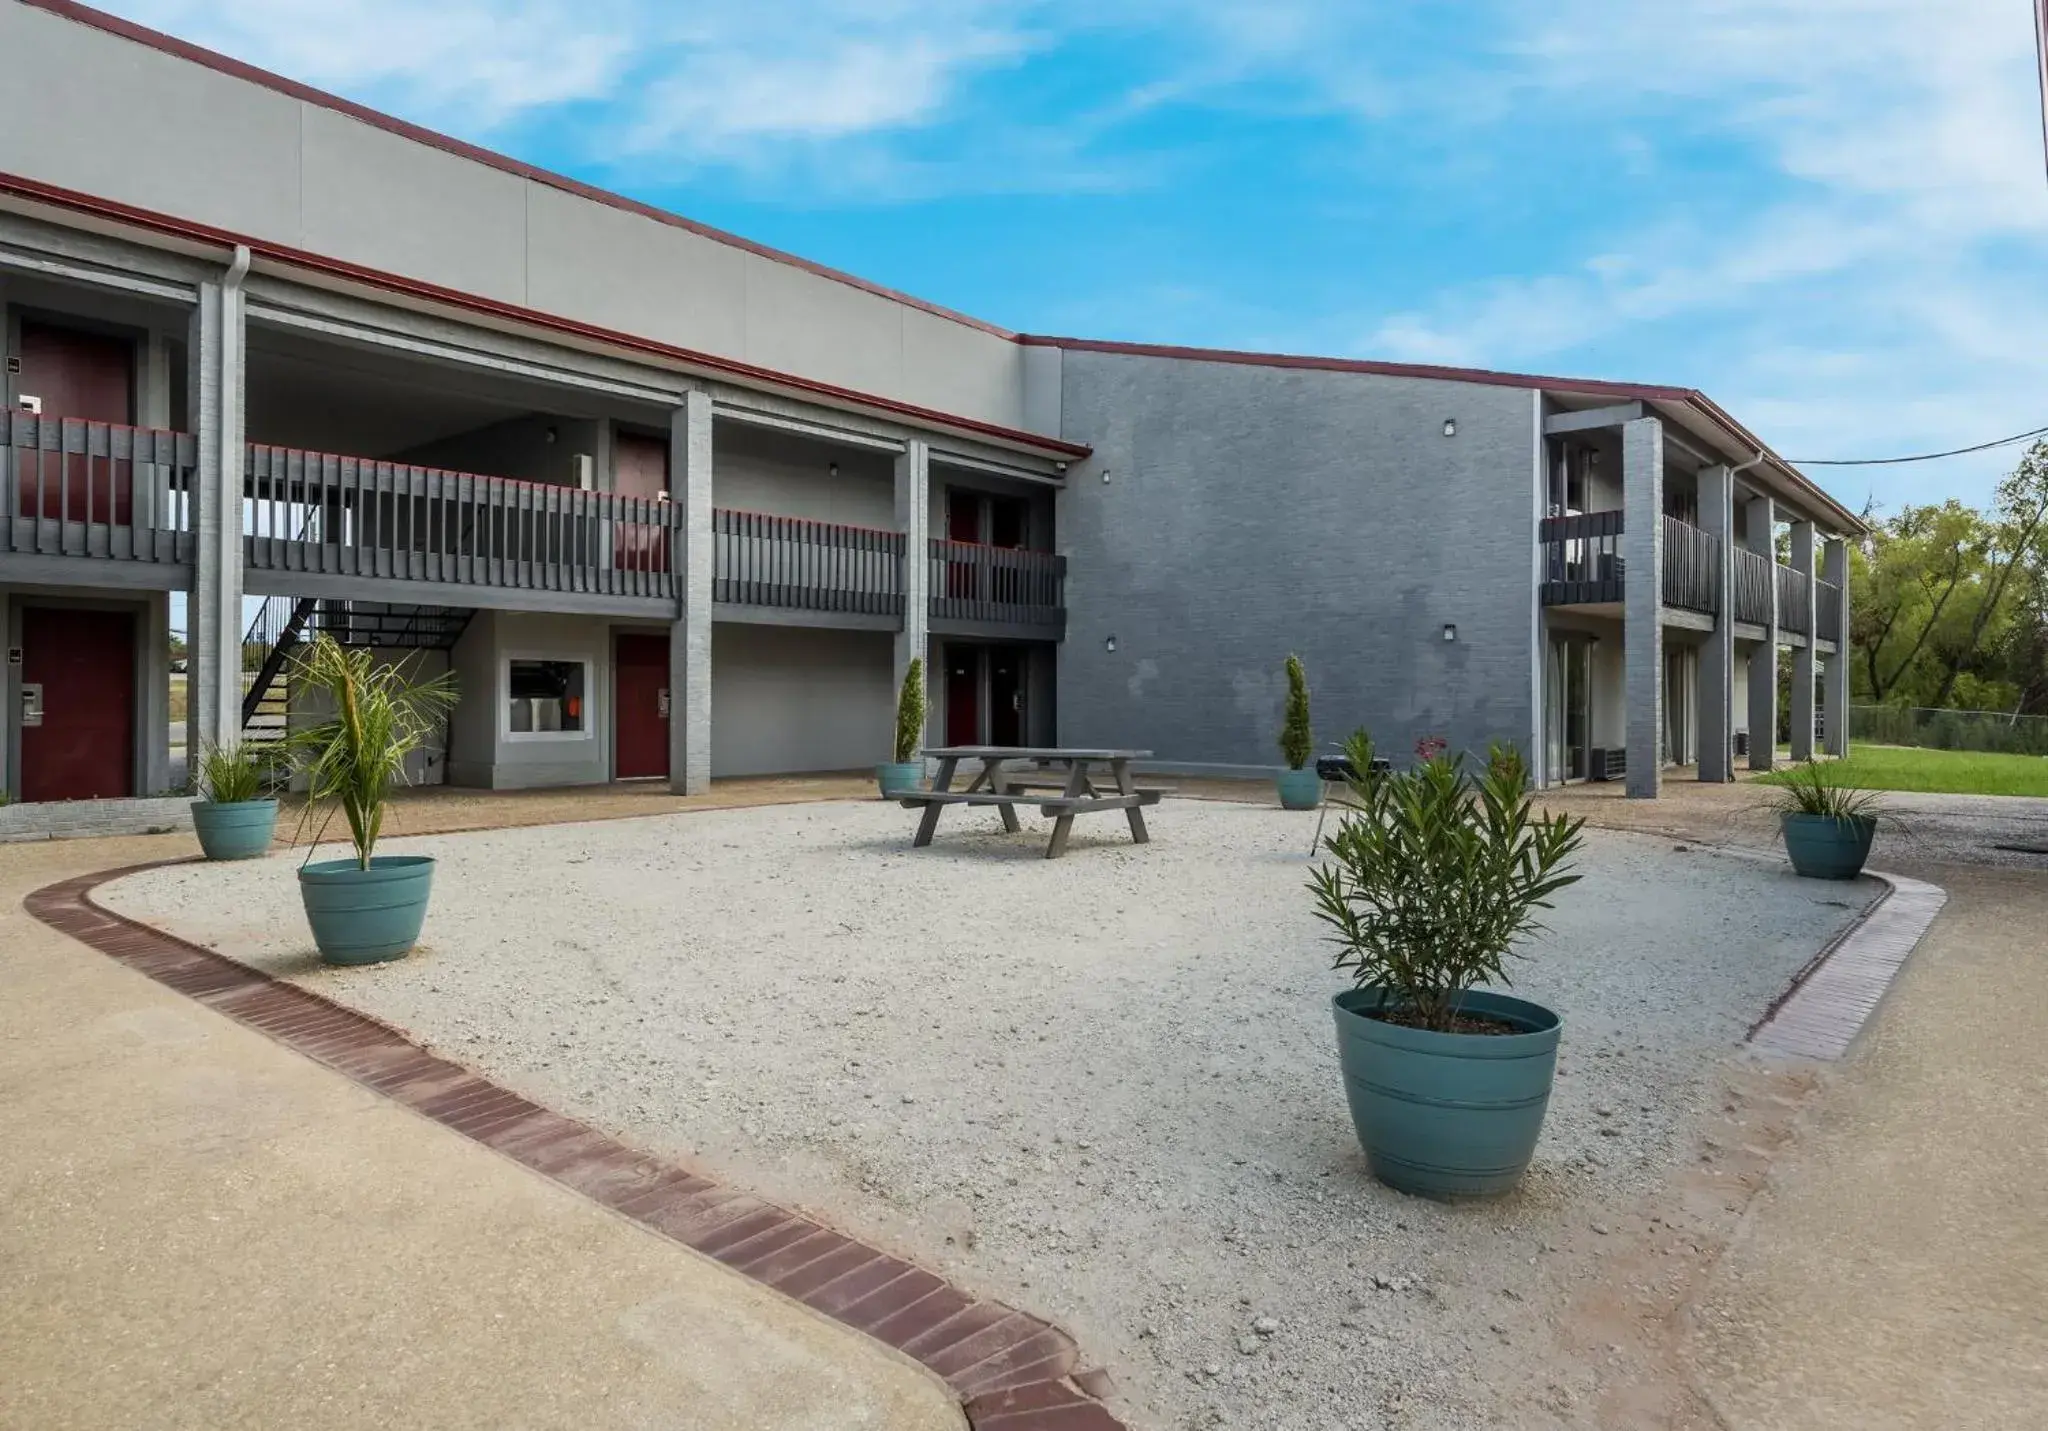 Inner courtyard view, Property Building in Red Roof Inn Madisonville